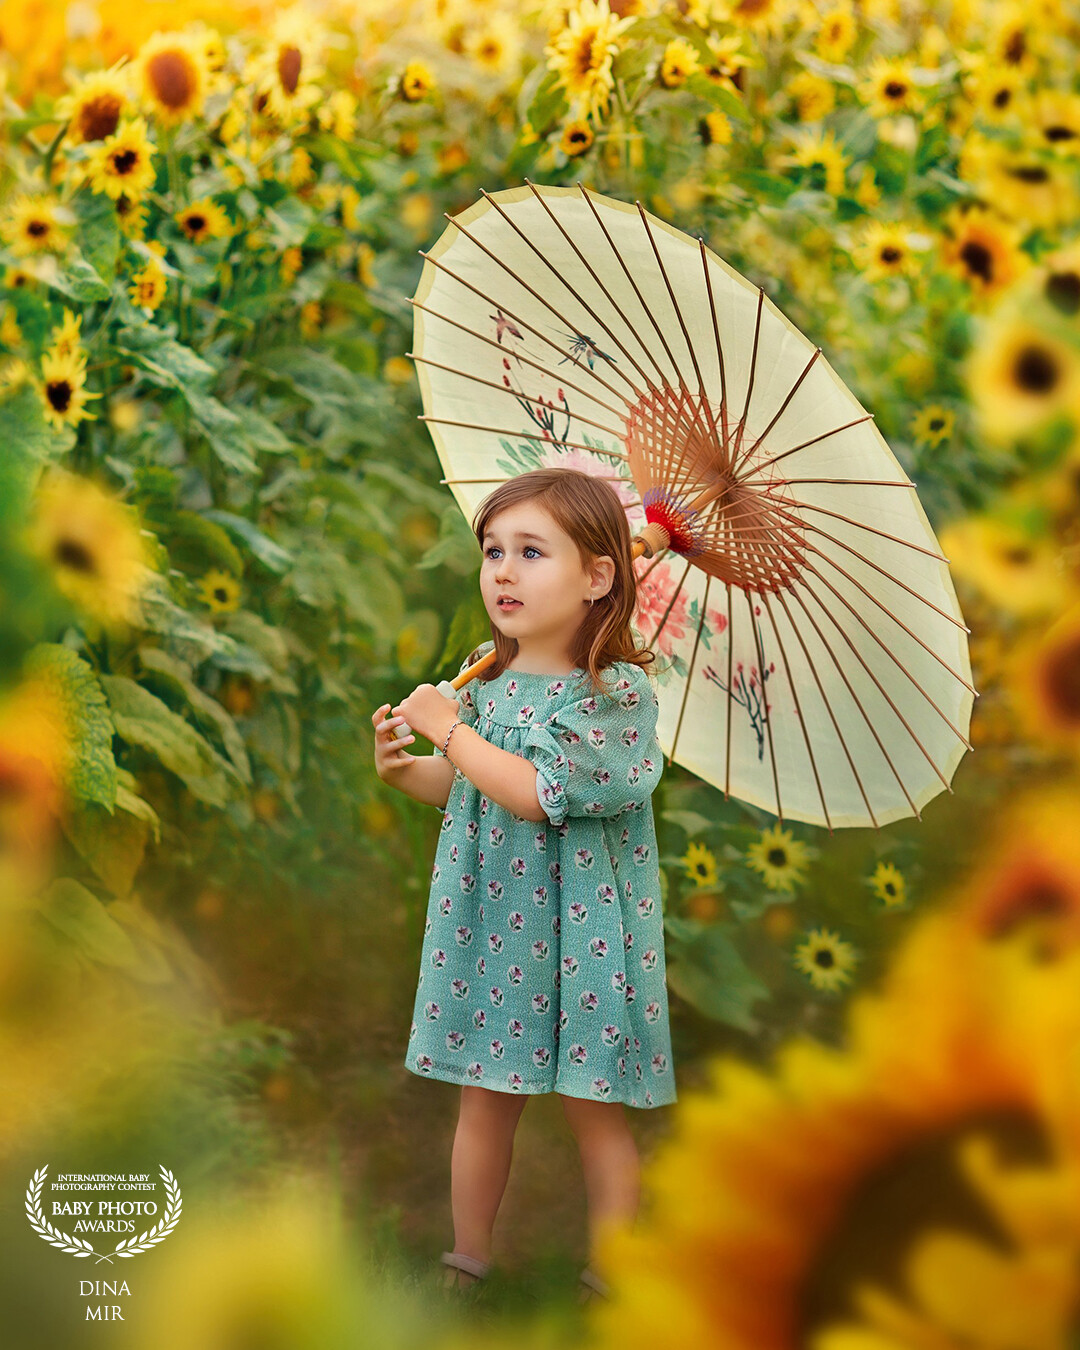 Childhood should be bright and beautiful. Olivia hides under an umbrella from the hot summer of 2022